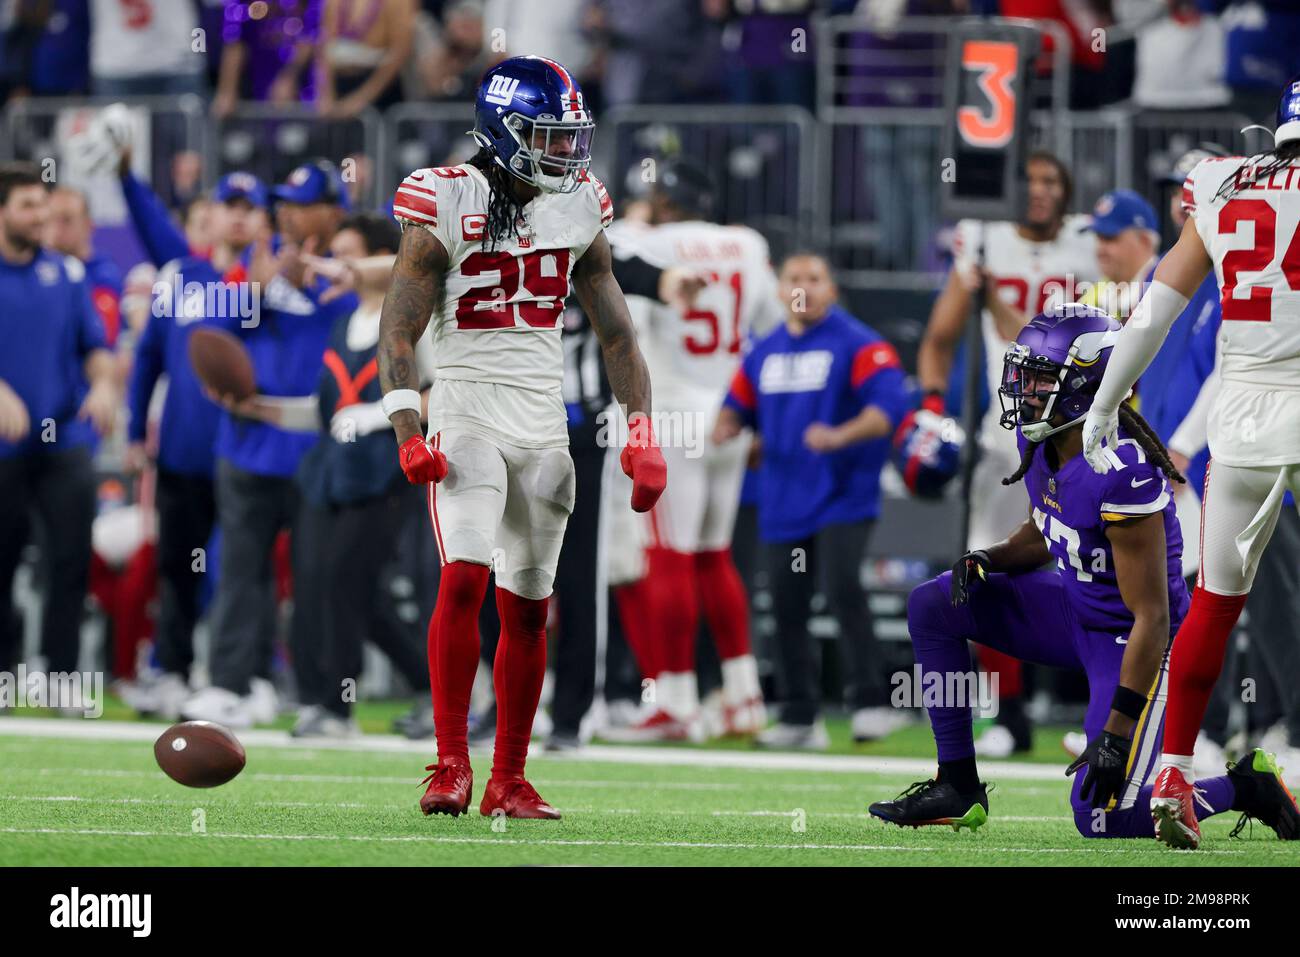 New York Giants safety Xavier McKinney (29) in coverage during an